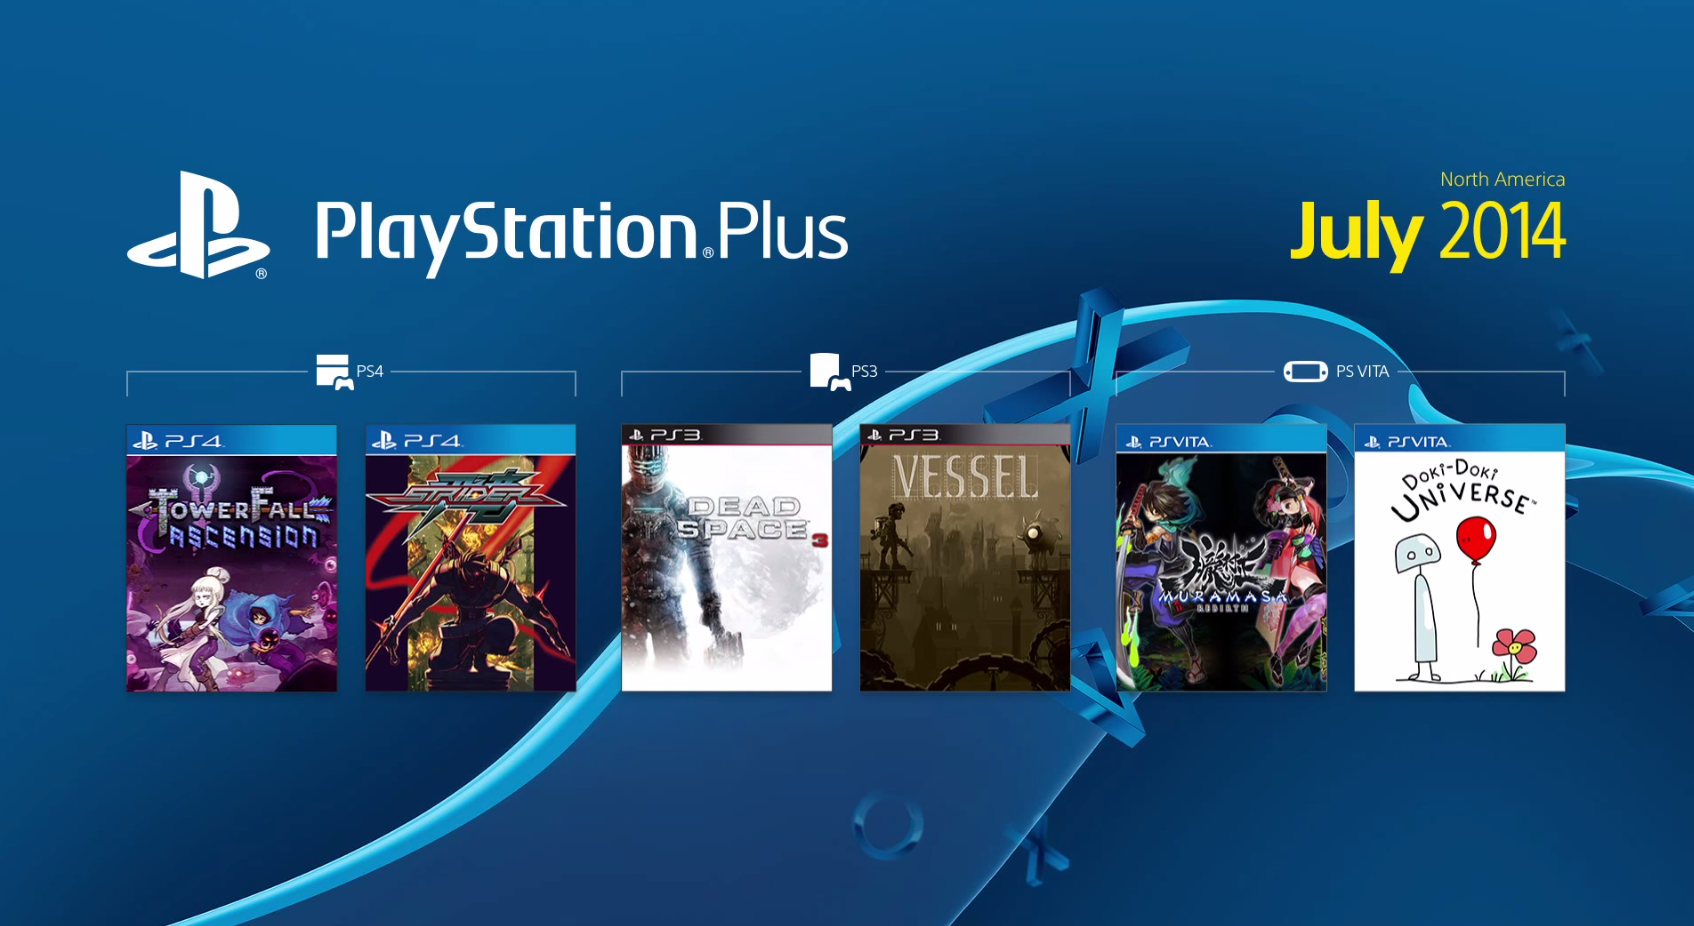 free july ps4 games